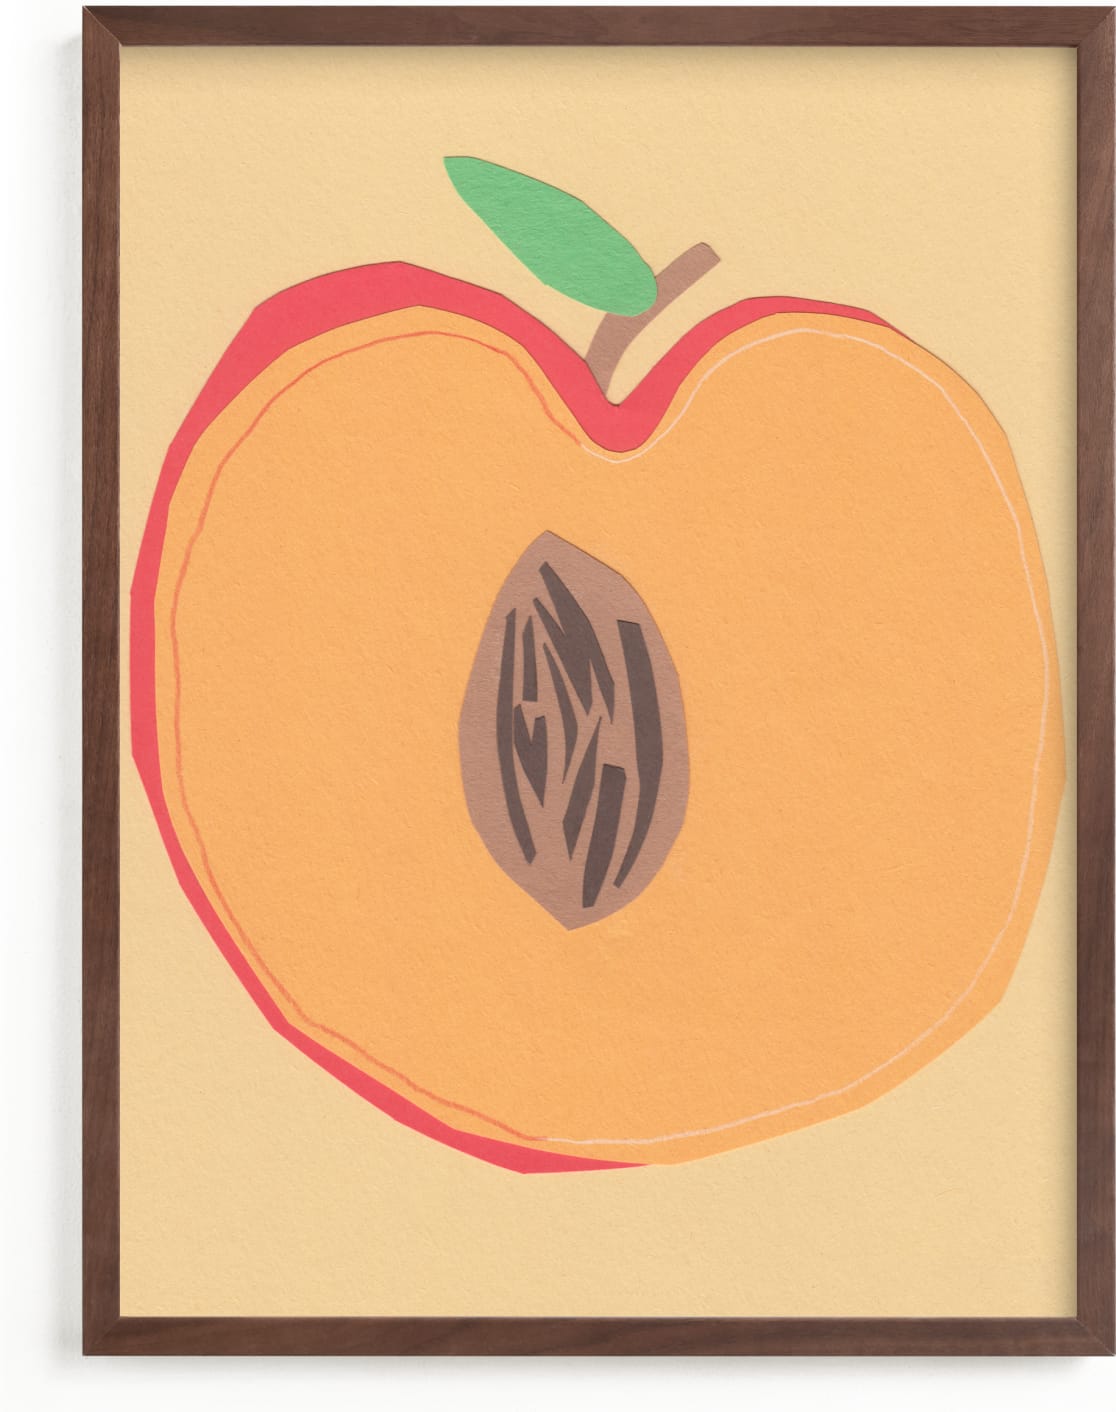 This is a beige art by Elliot Stokes called Peach Pit.